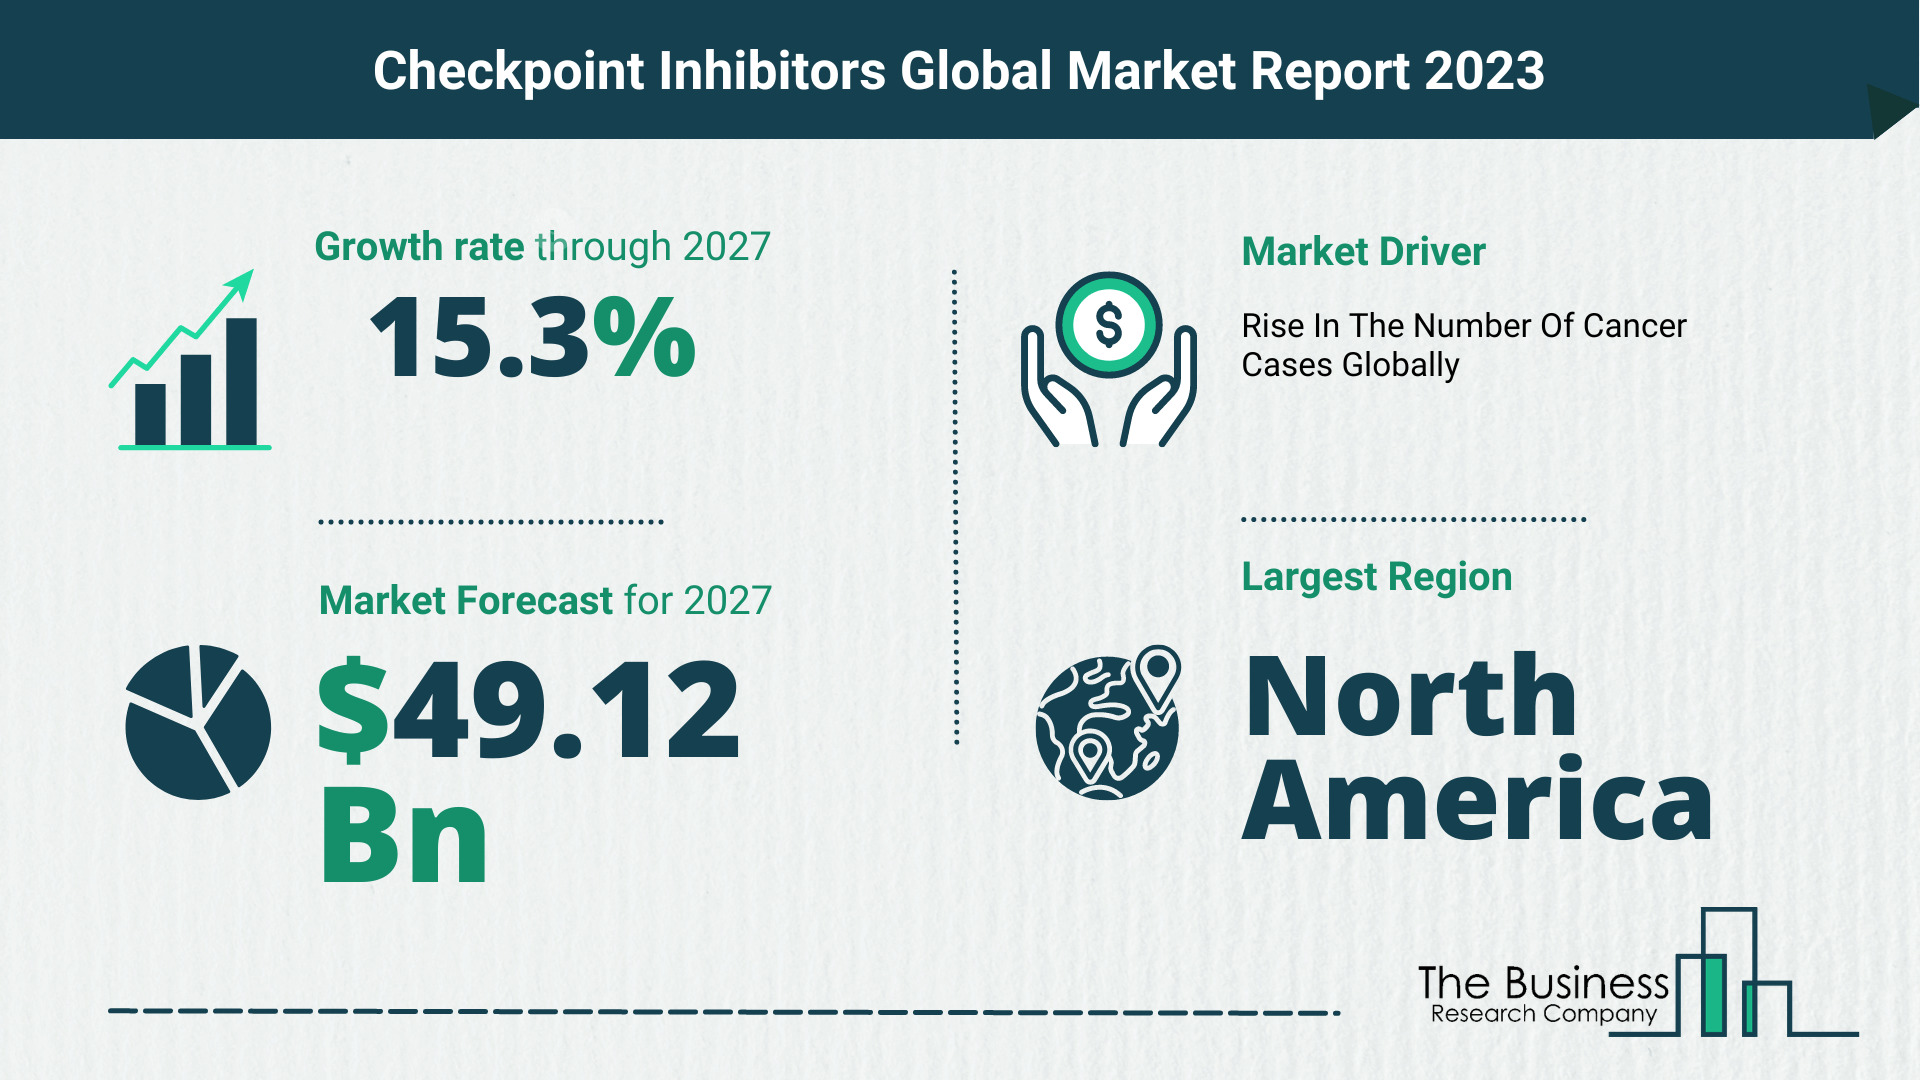 What Will The Checkpoint Inhibitors Market Look Like In 2023?